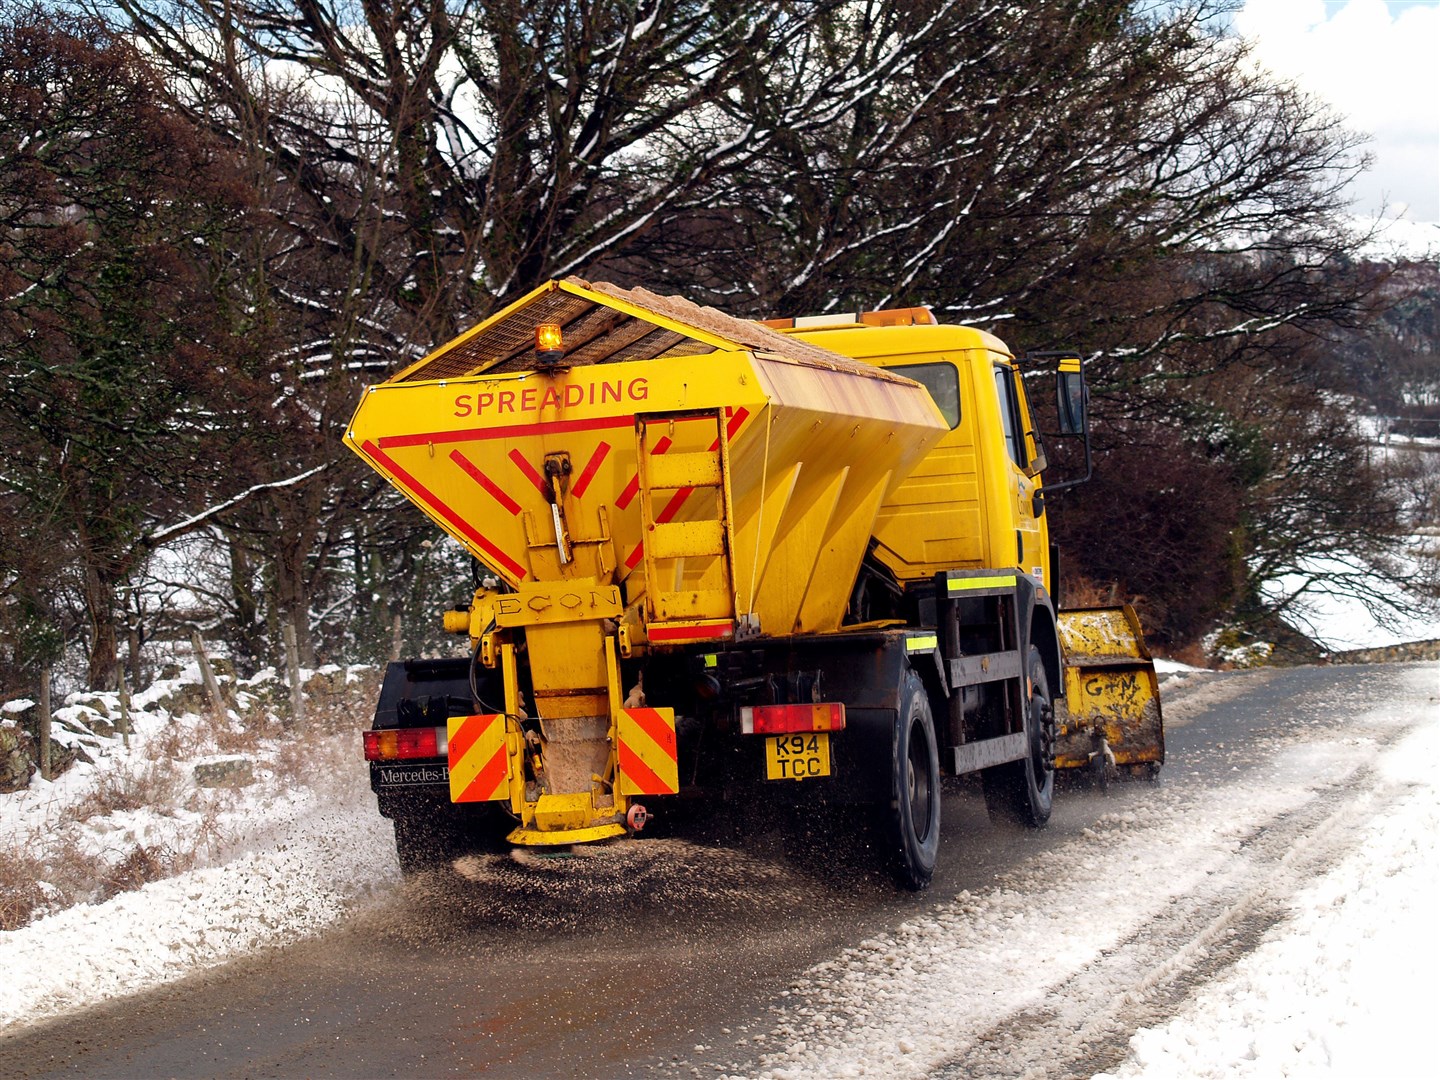 Roads have been gritted in some stretches of Ross-shire in response to the conditions.